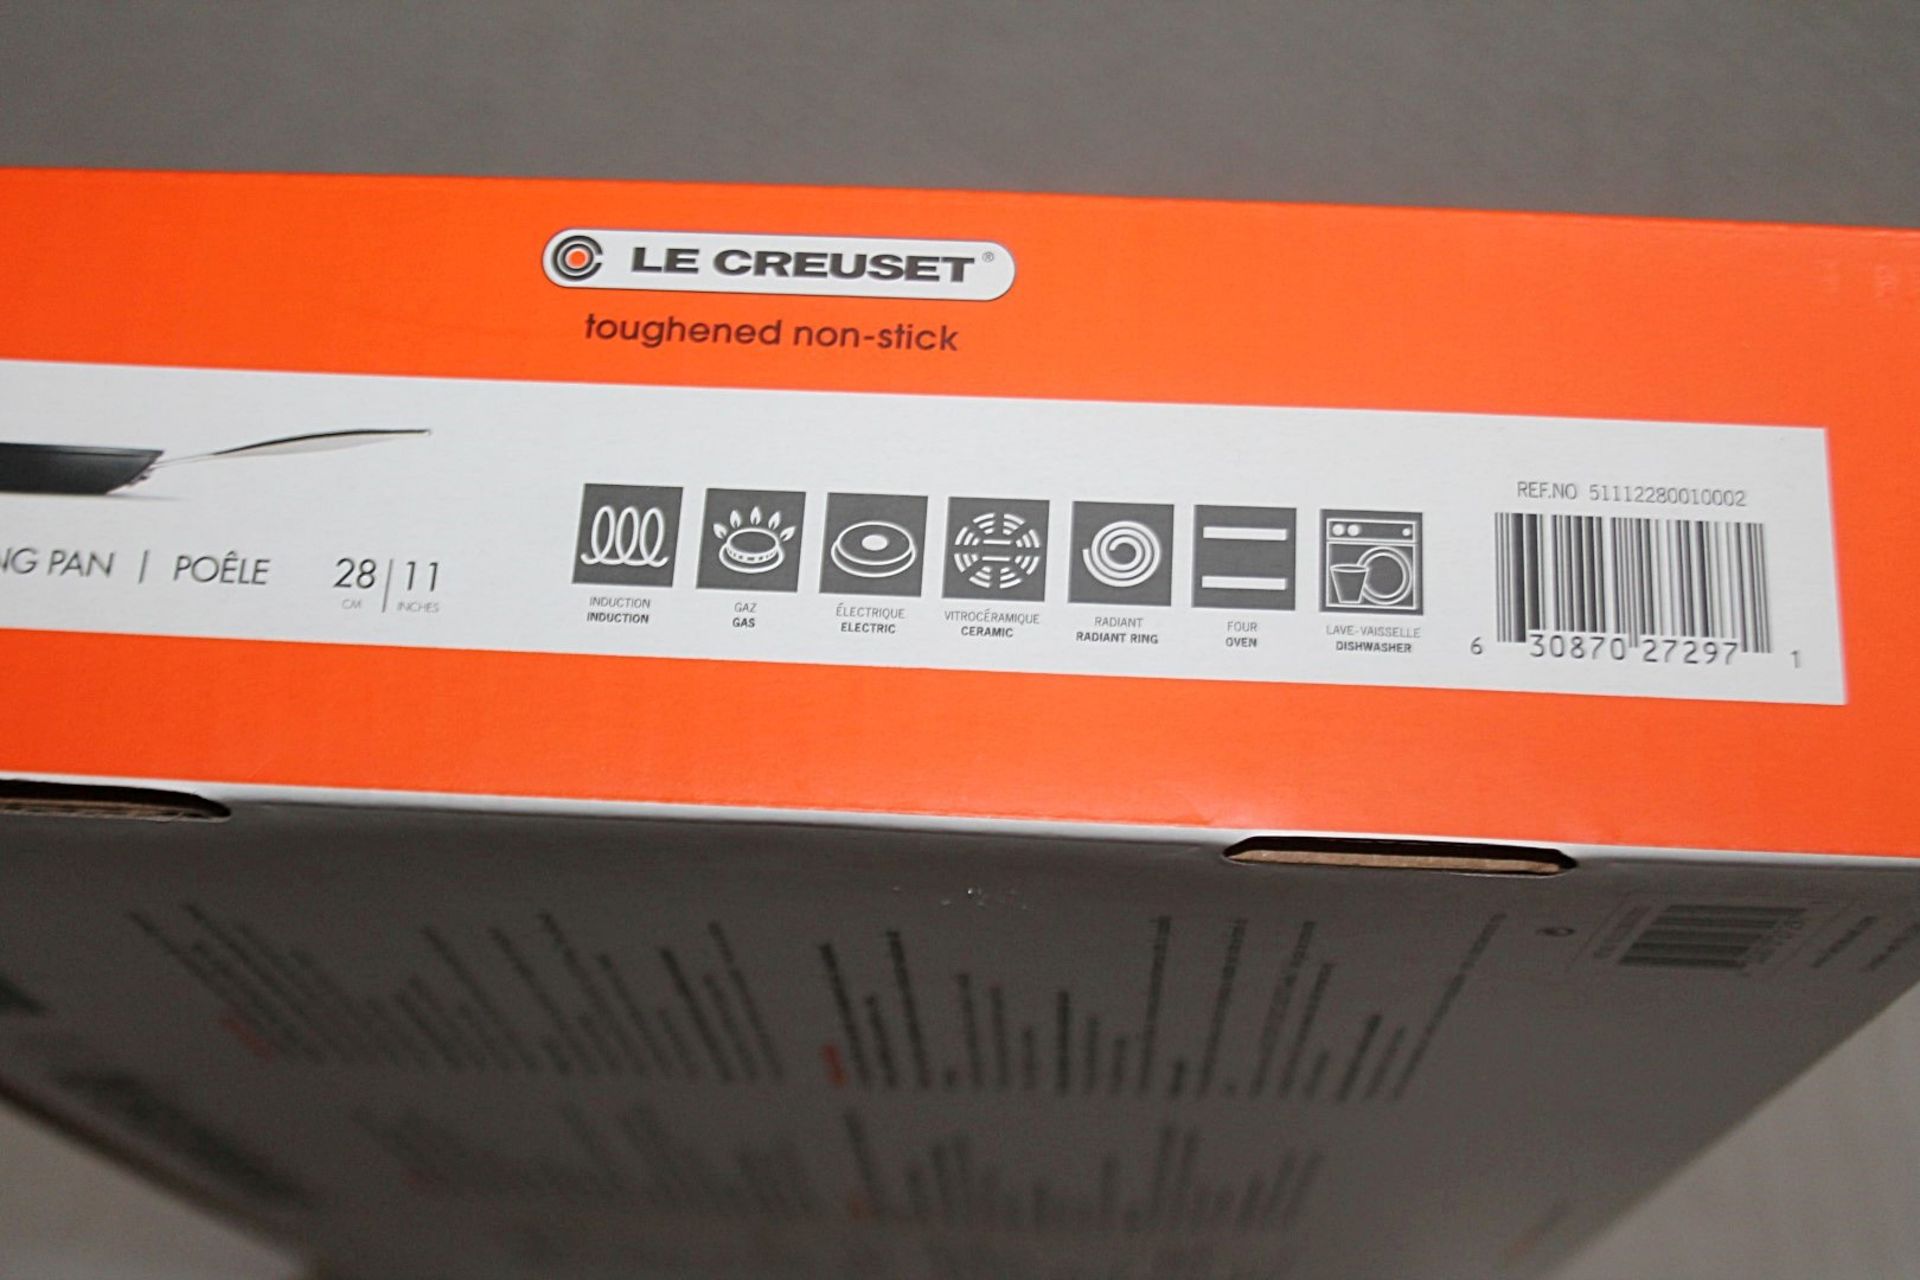 1 x LE CREUSET Shallow Frying Pan (28cm) - Original Price £130.00 - Unused Boxed Stock - Image 5 of 9